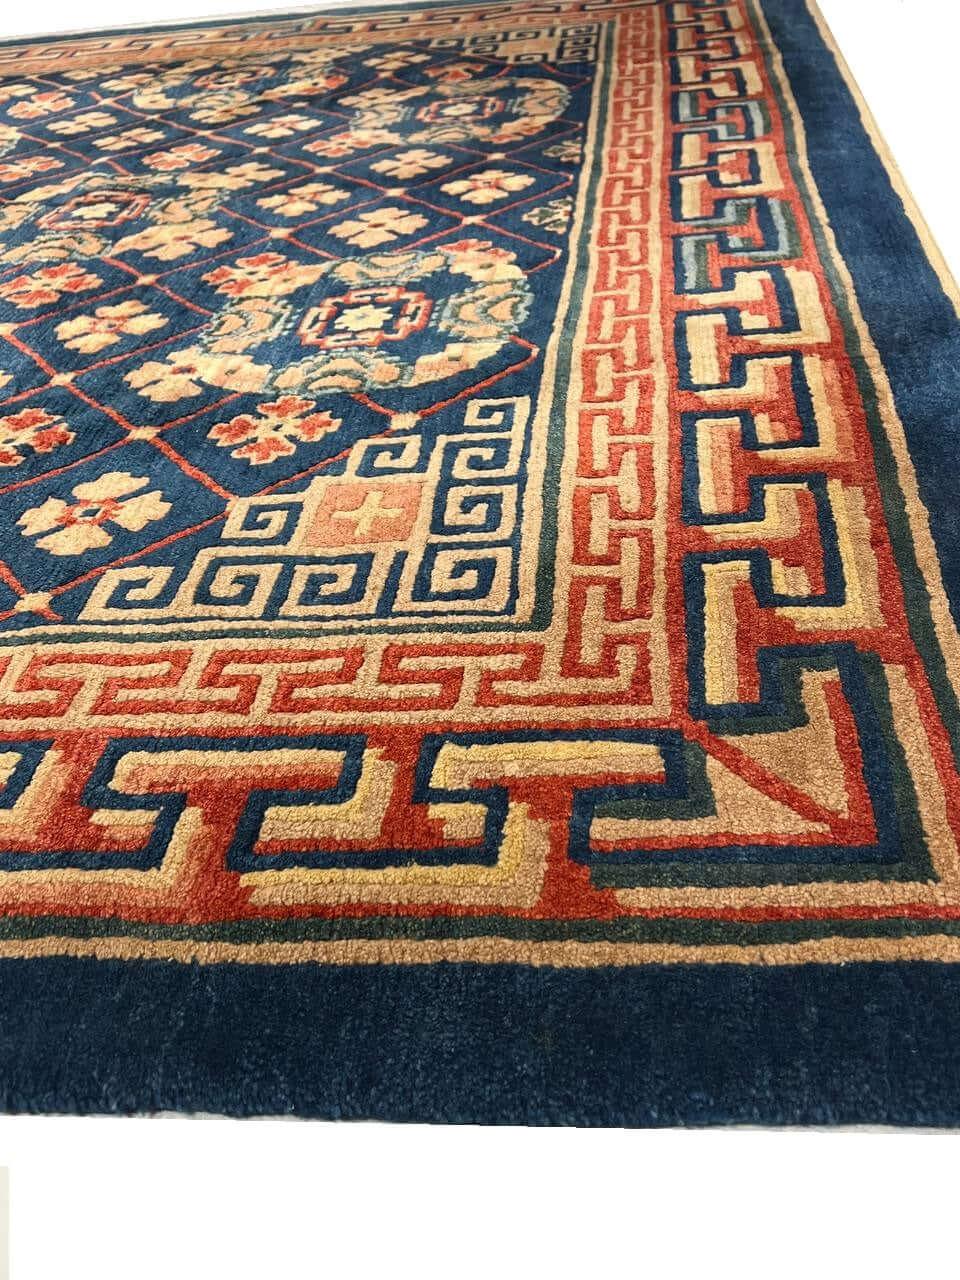 Canvello 1940's Fine Hand Knotted Antique Tabetan rug - 8'3'' X 9'8''